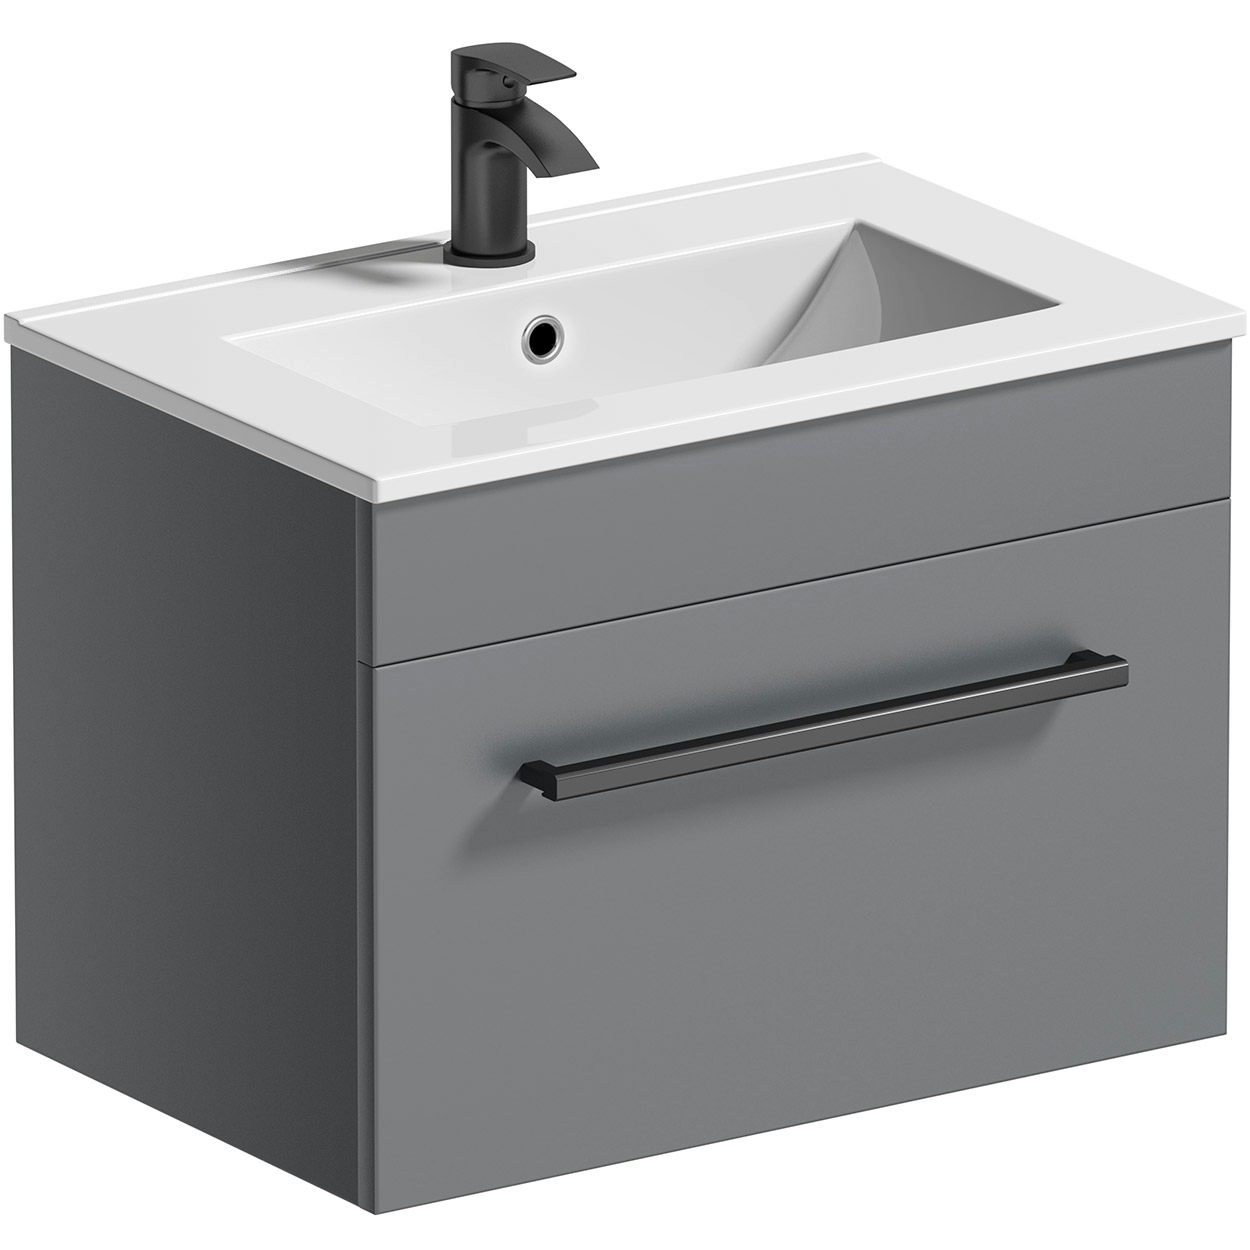 Orchard Derwent stone grey wall hung vanity unit and ceramic basin 600mm with black handle, tap & waste